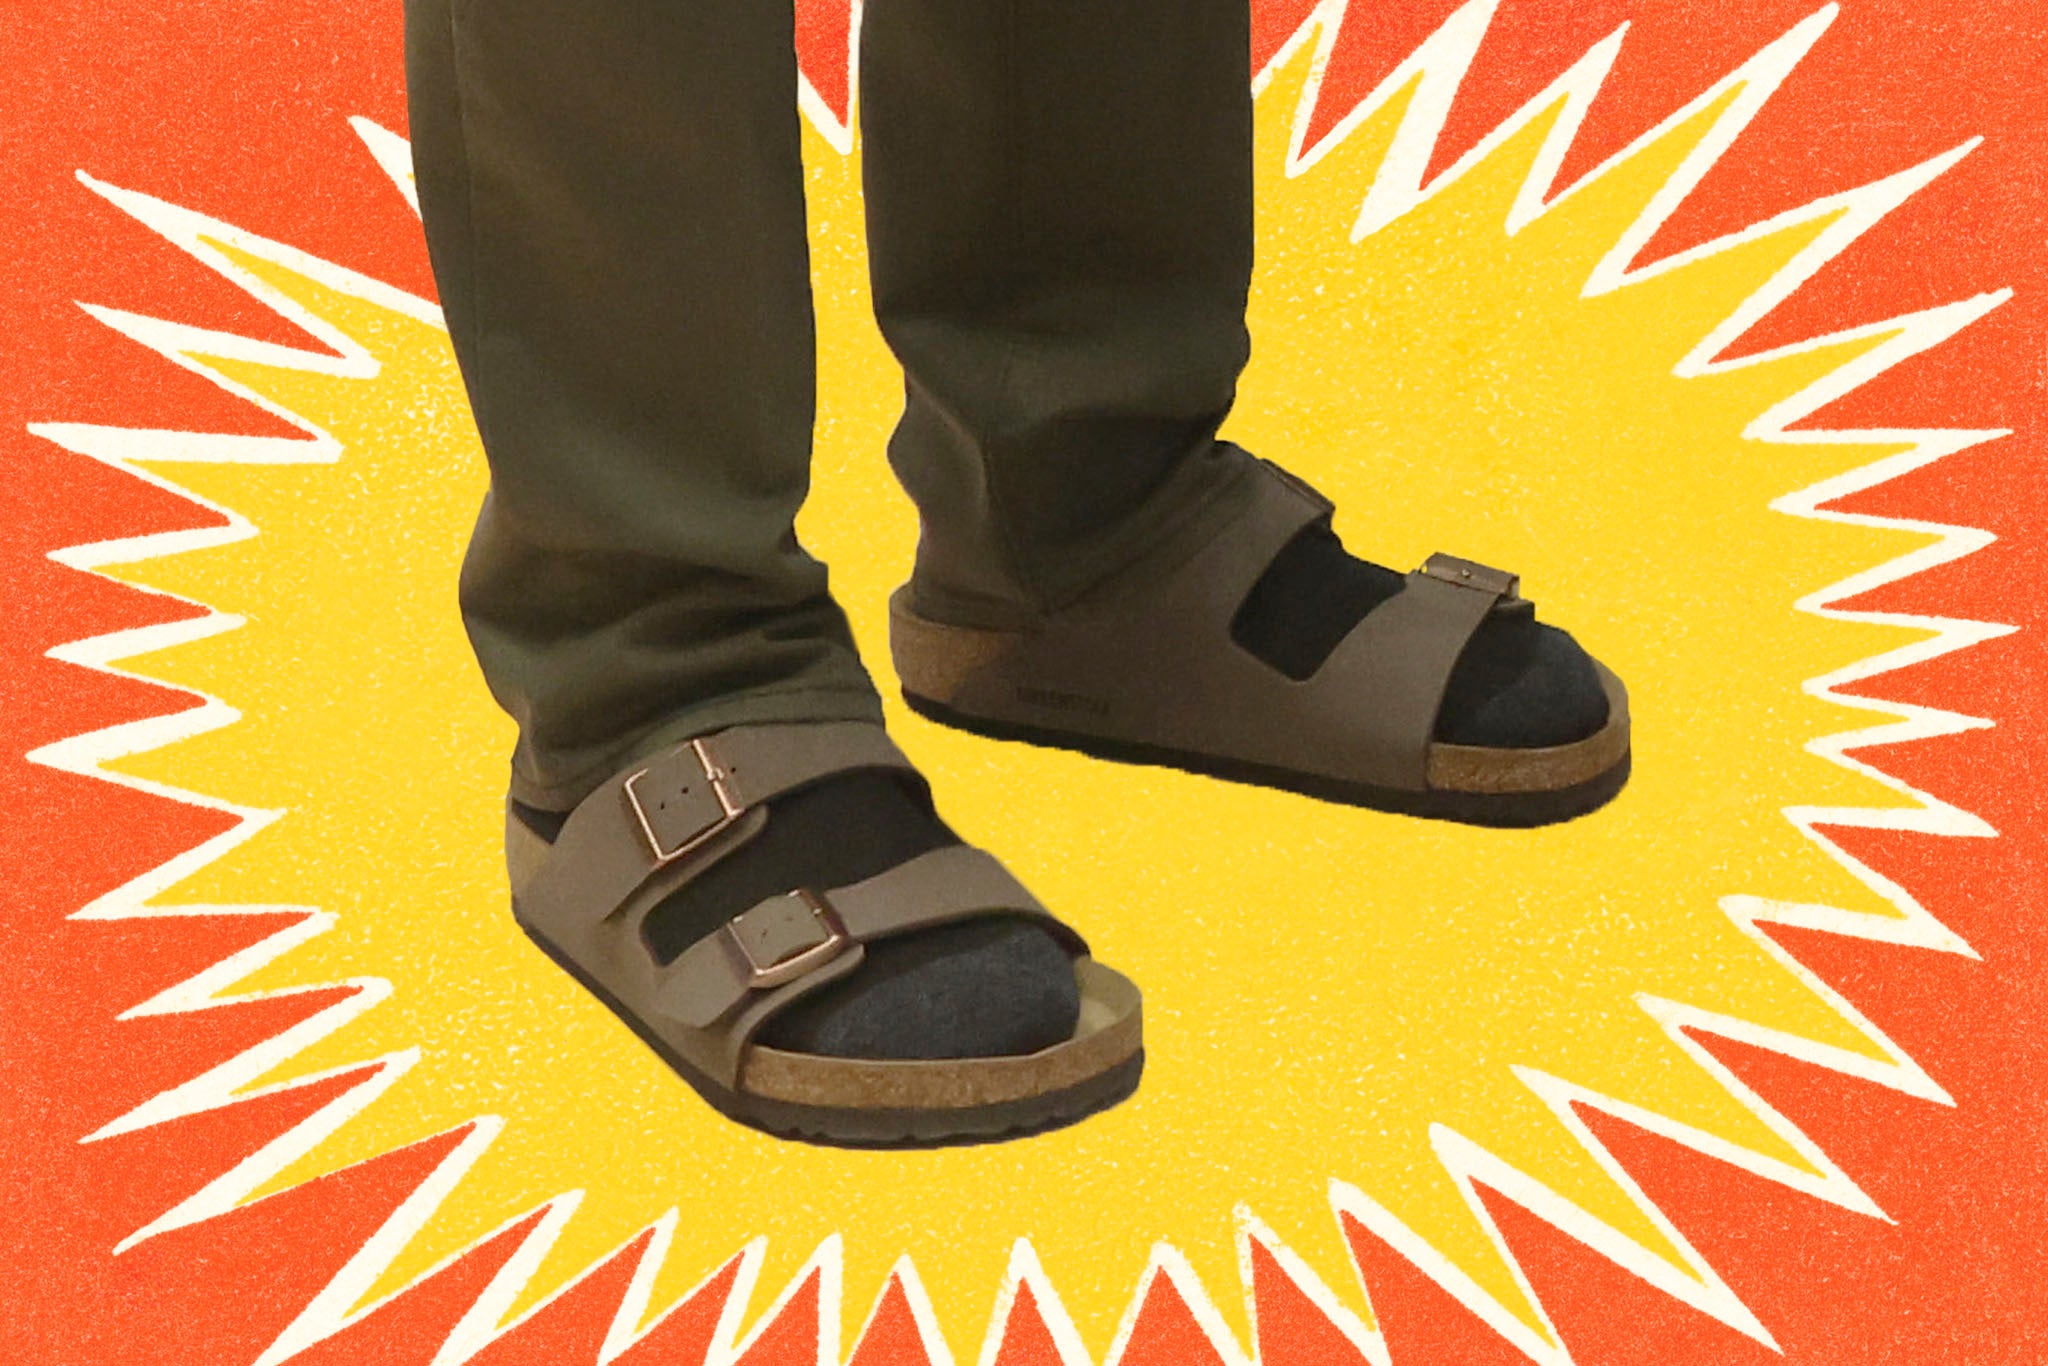 <p>‘There are no gimmicks’: The humble Birkenstock has gone from bleak to chic</p>